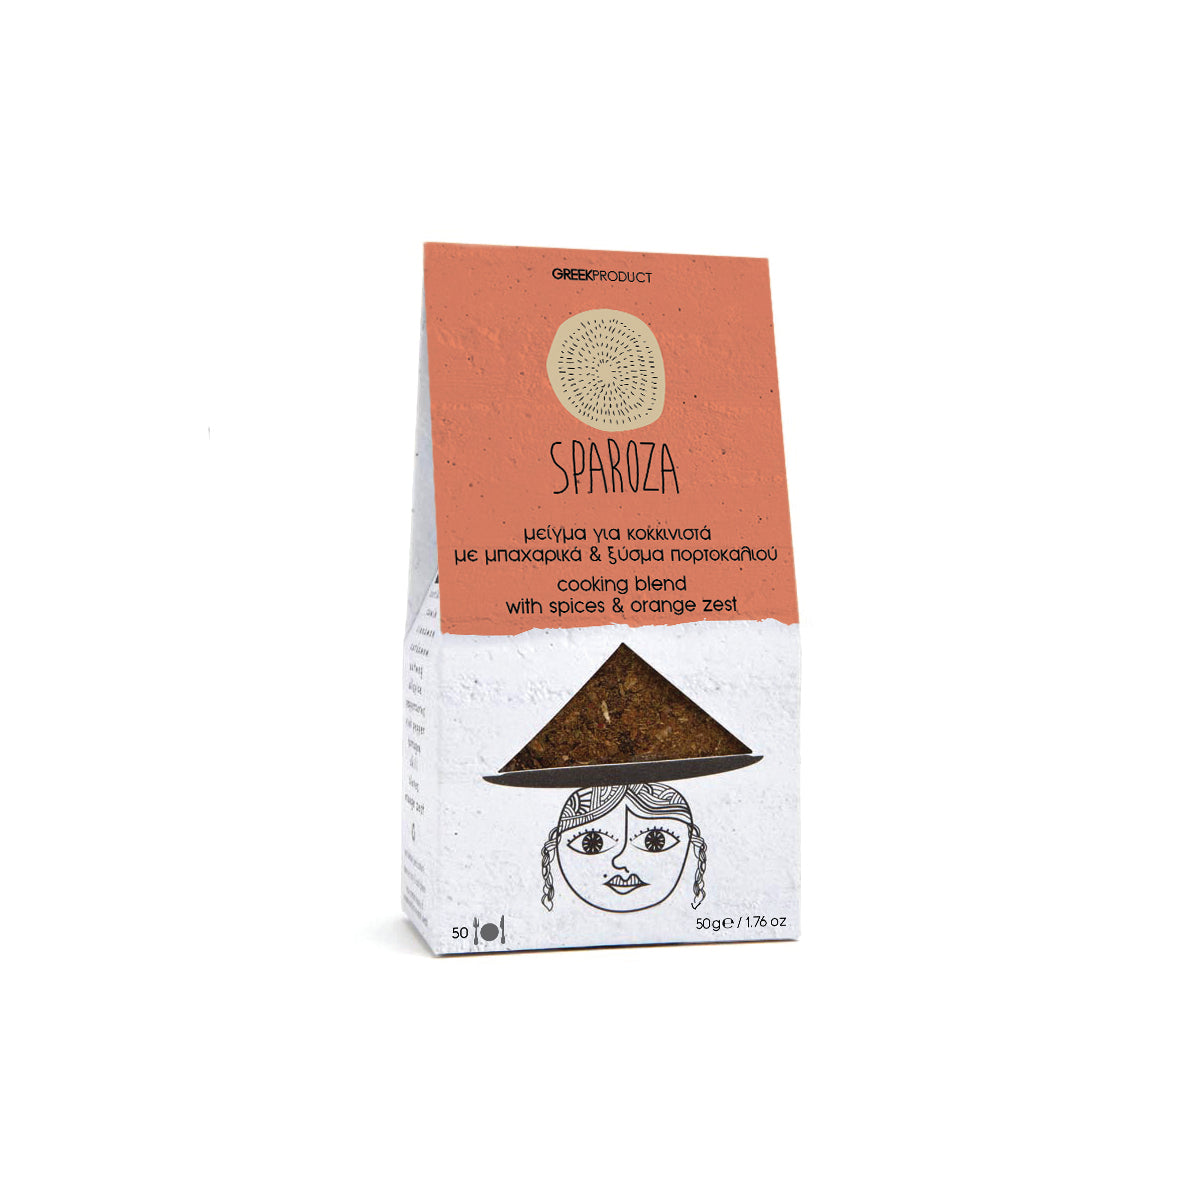 Sparoza Handcrafted Cooking Blend with Spices & Orange Zest